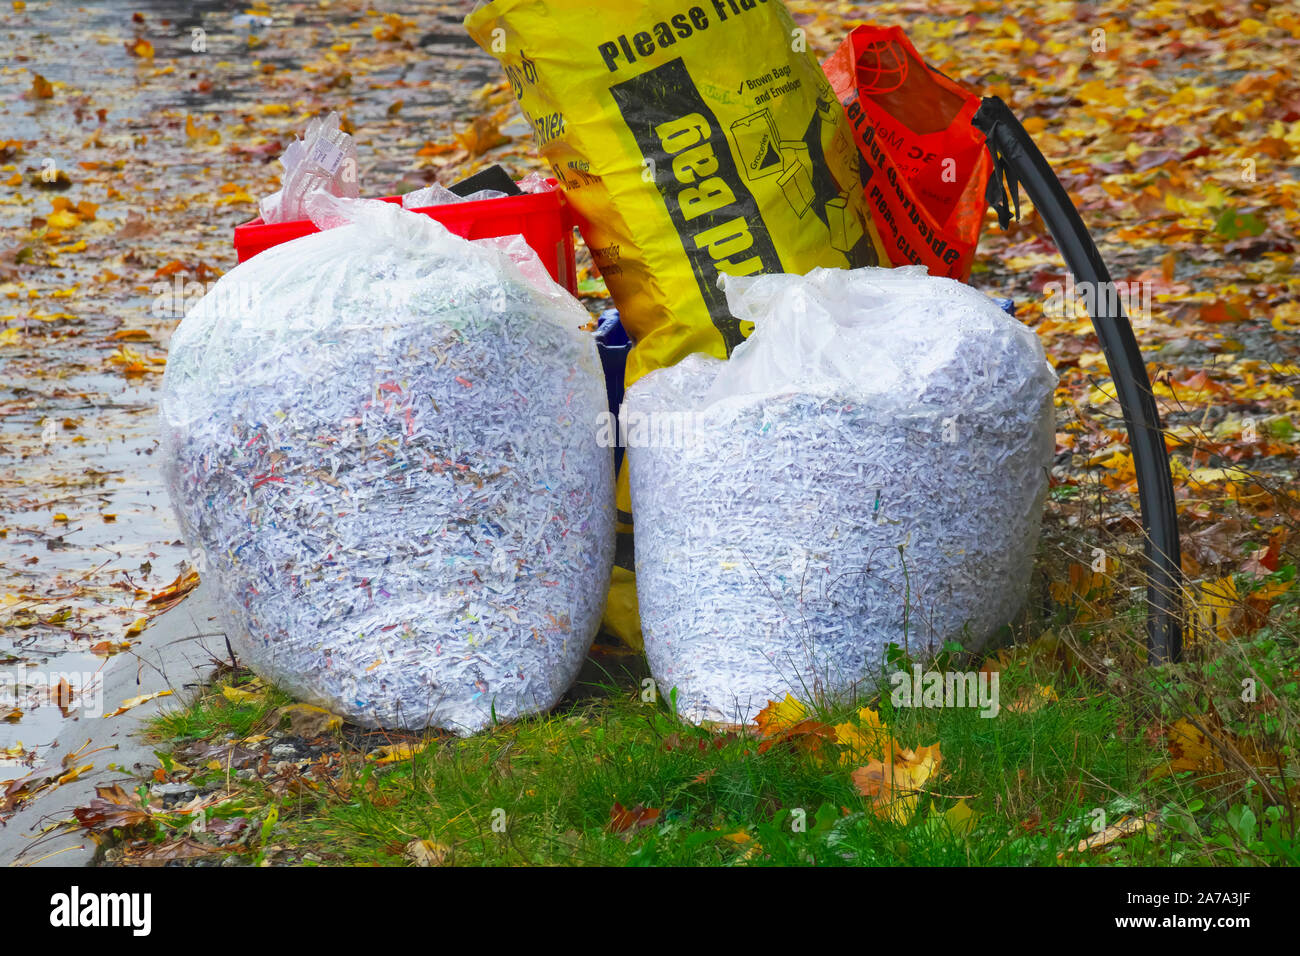 https://c8.alamy.com/comp/2A7A3JF/shredded-paper-in-clear-plastic-bags-for-recycling-pickup-at-curbside-2A7A3JF.jpg